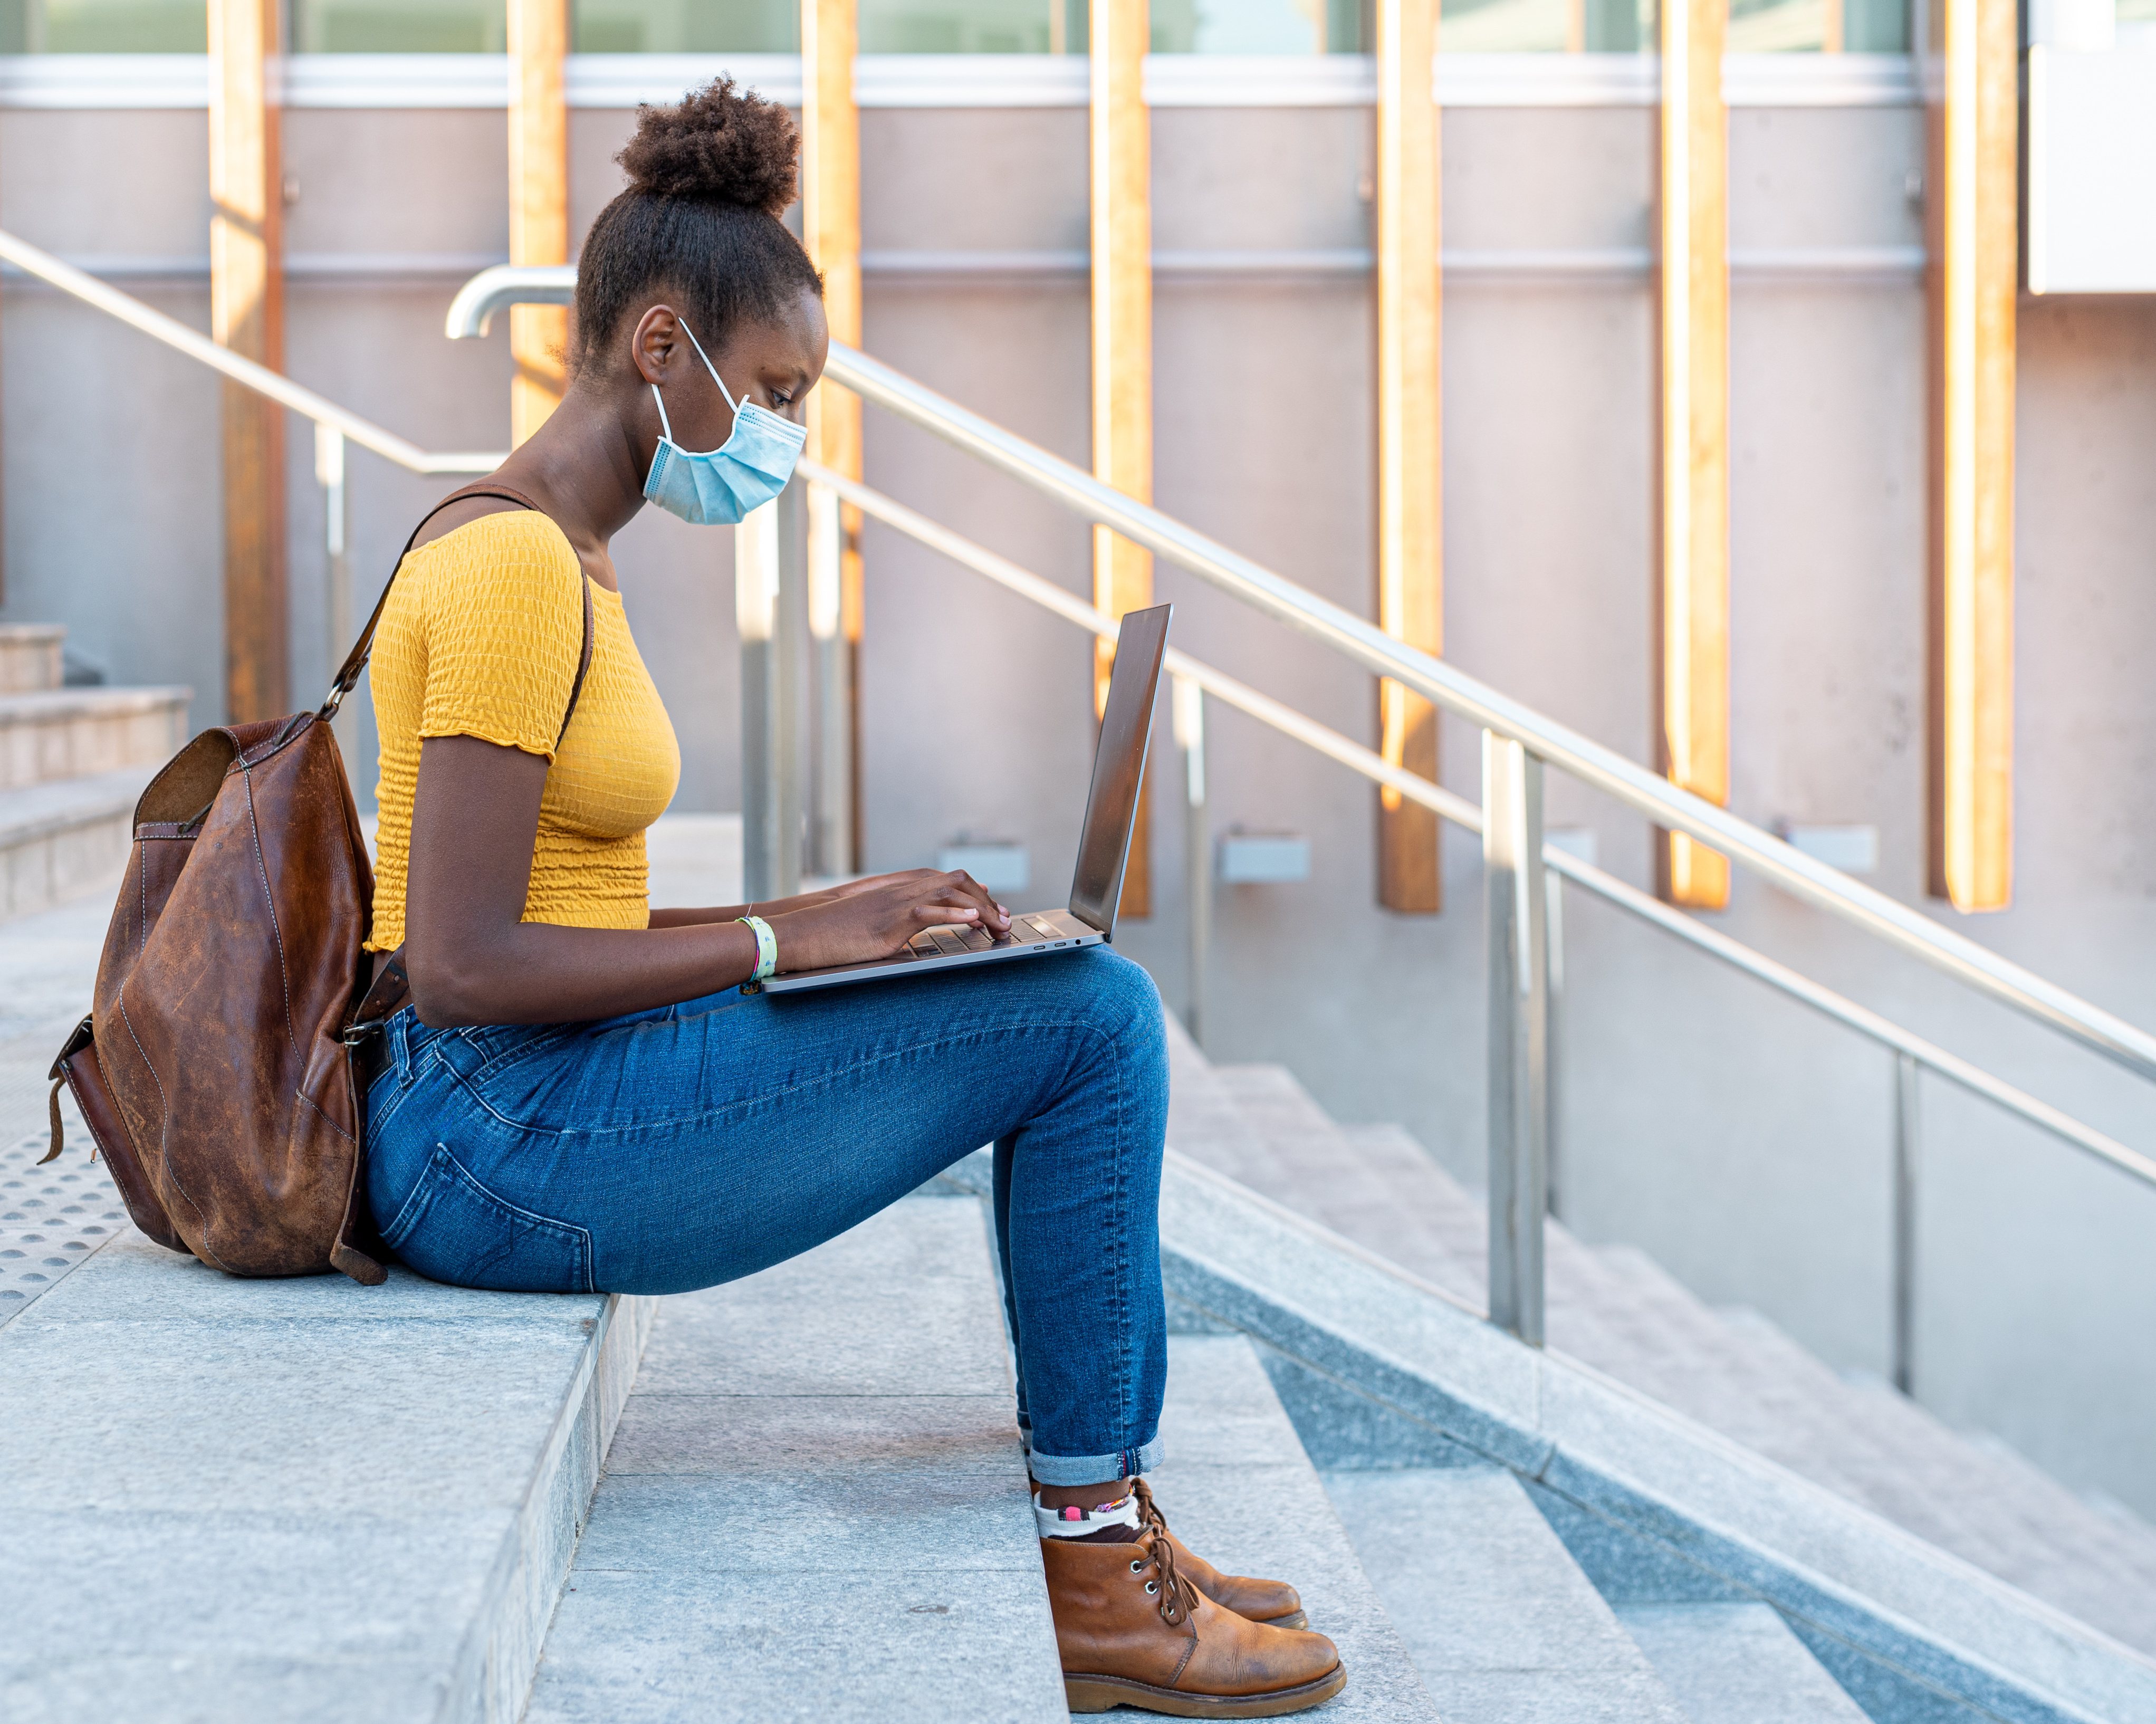 Young person wearing a yellow shirt, jeans, boots, a medical face mask and a backpack sitting on exterior concrete steps typing on a laptop